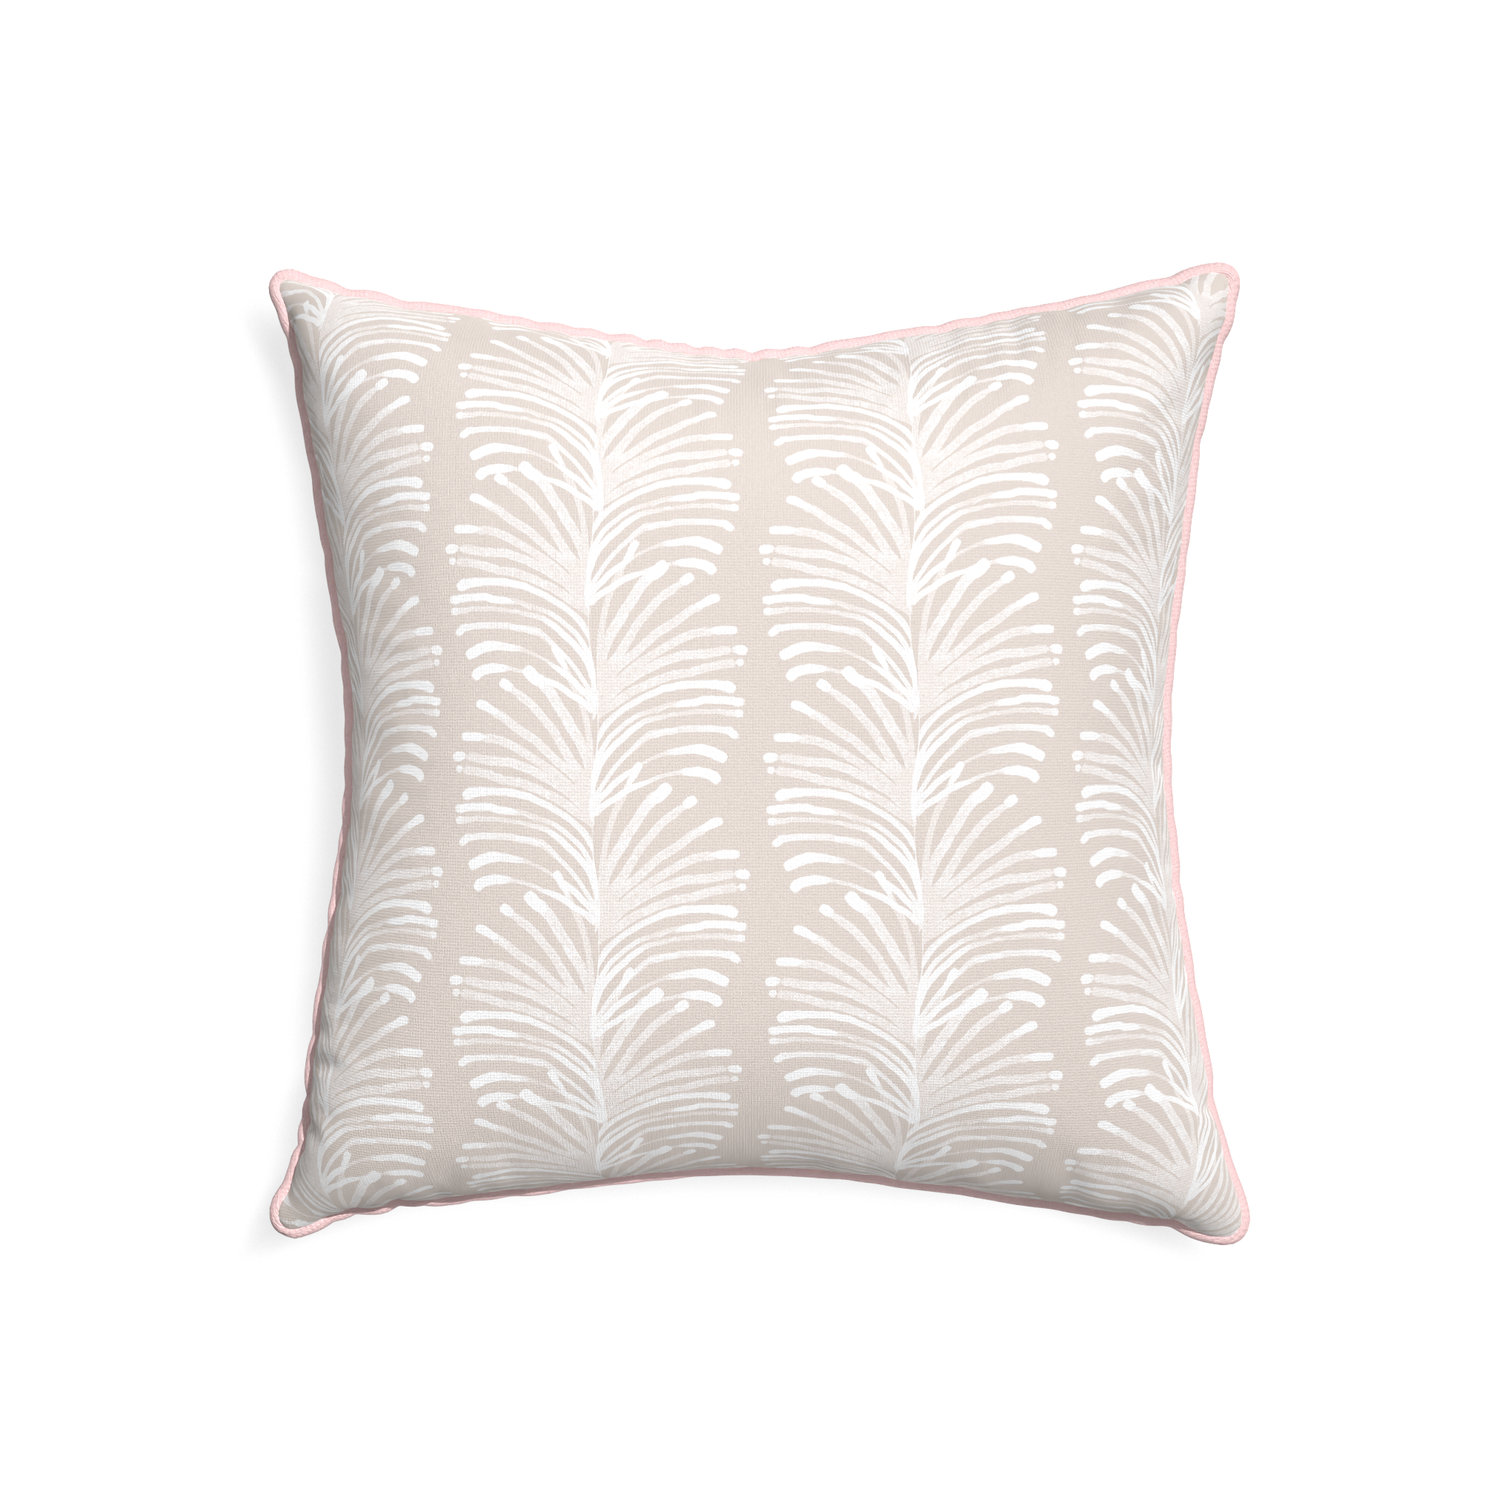 22-square emma sand custom pillow with petal piping on white background